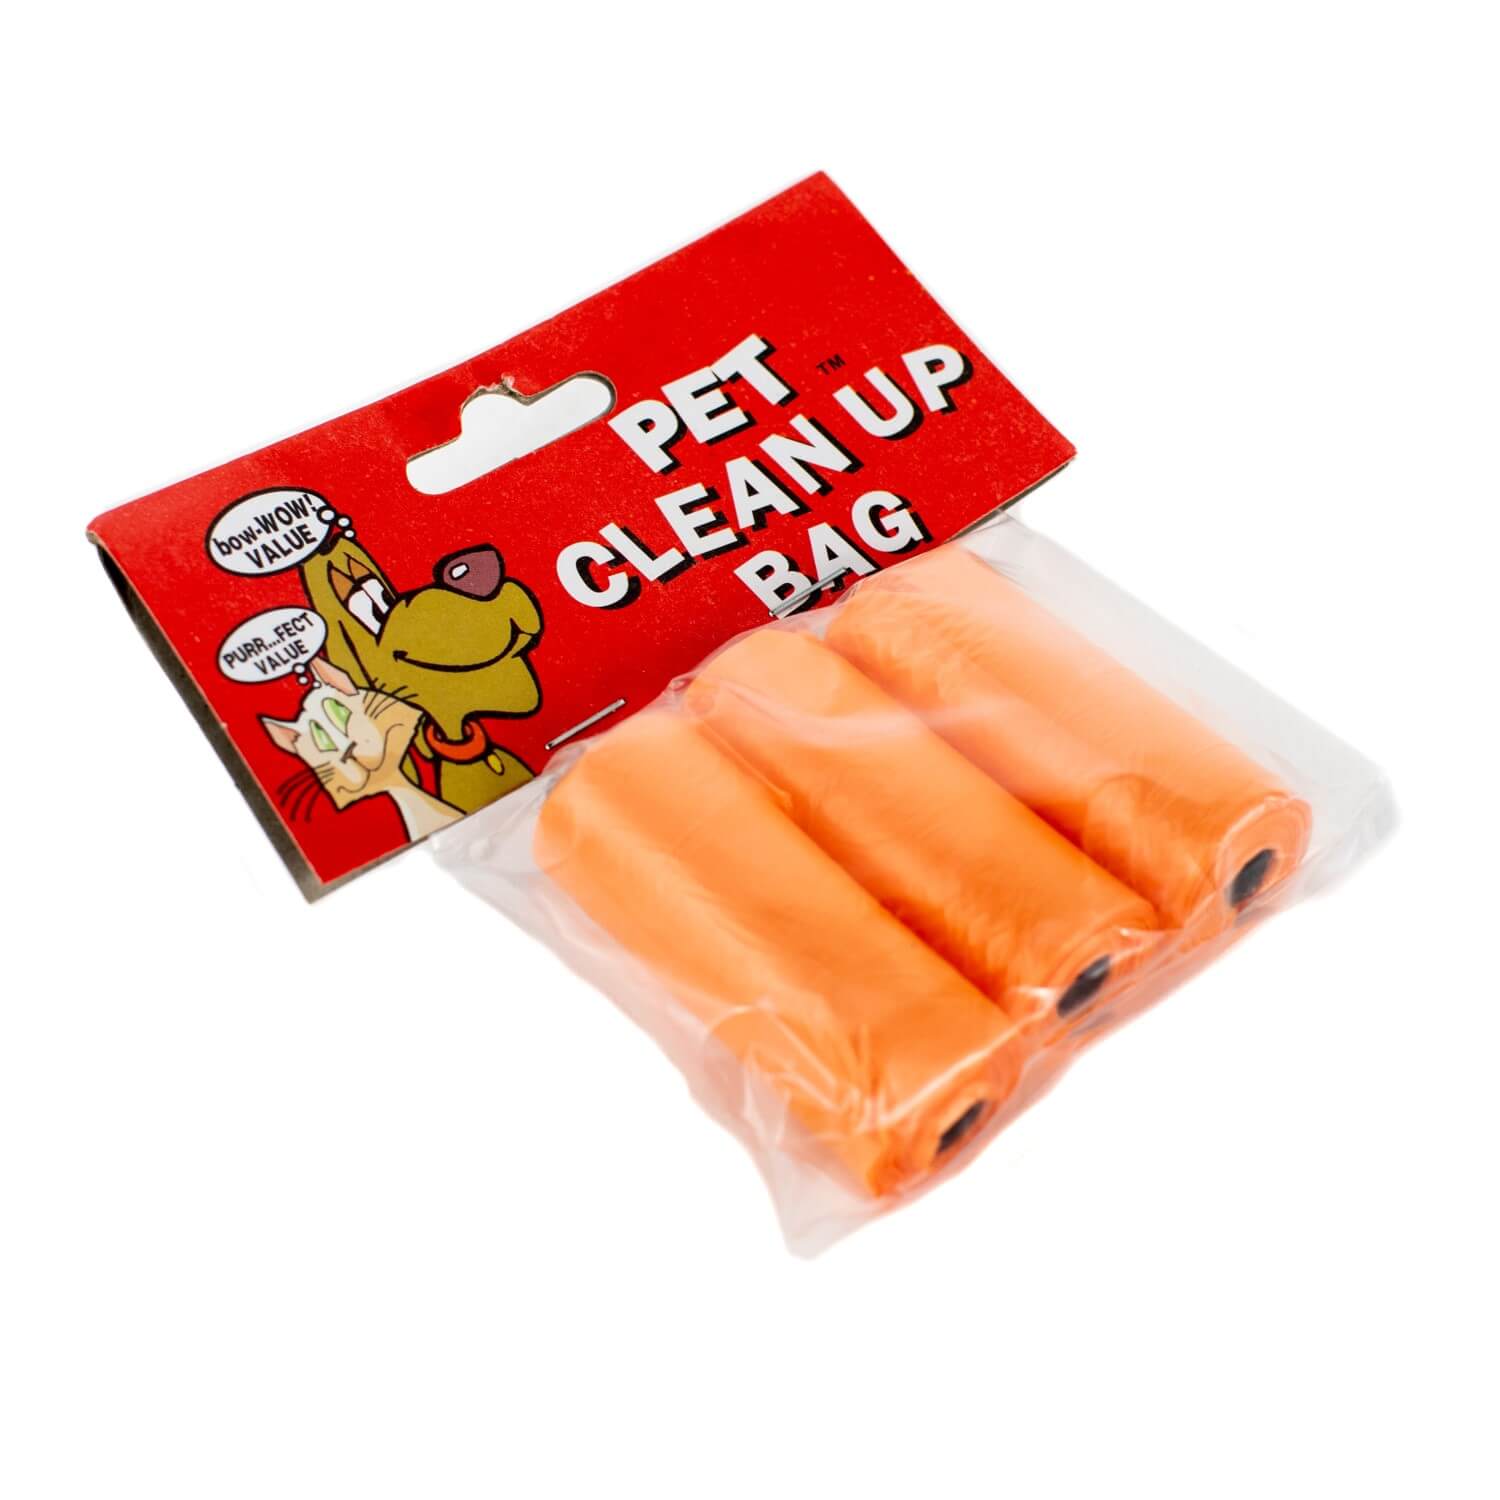 Pet Clean-Up Kit: Waste Bags with Dispenser and Leash Clip in a package.